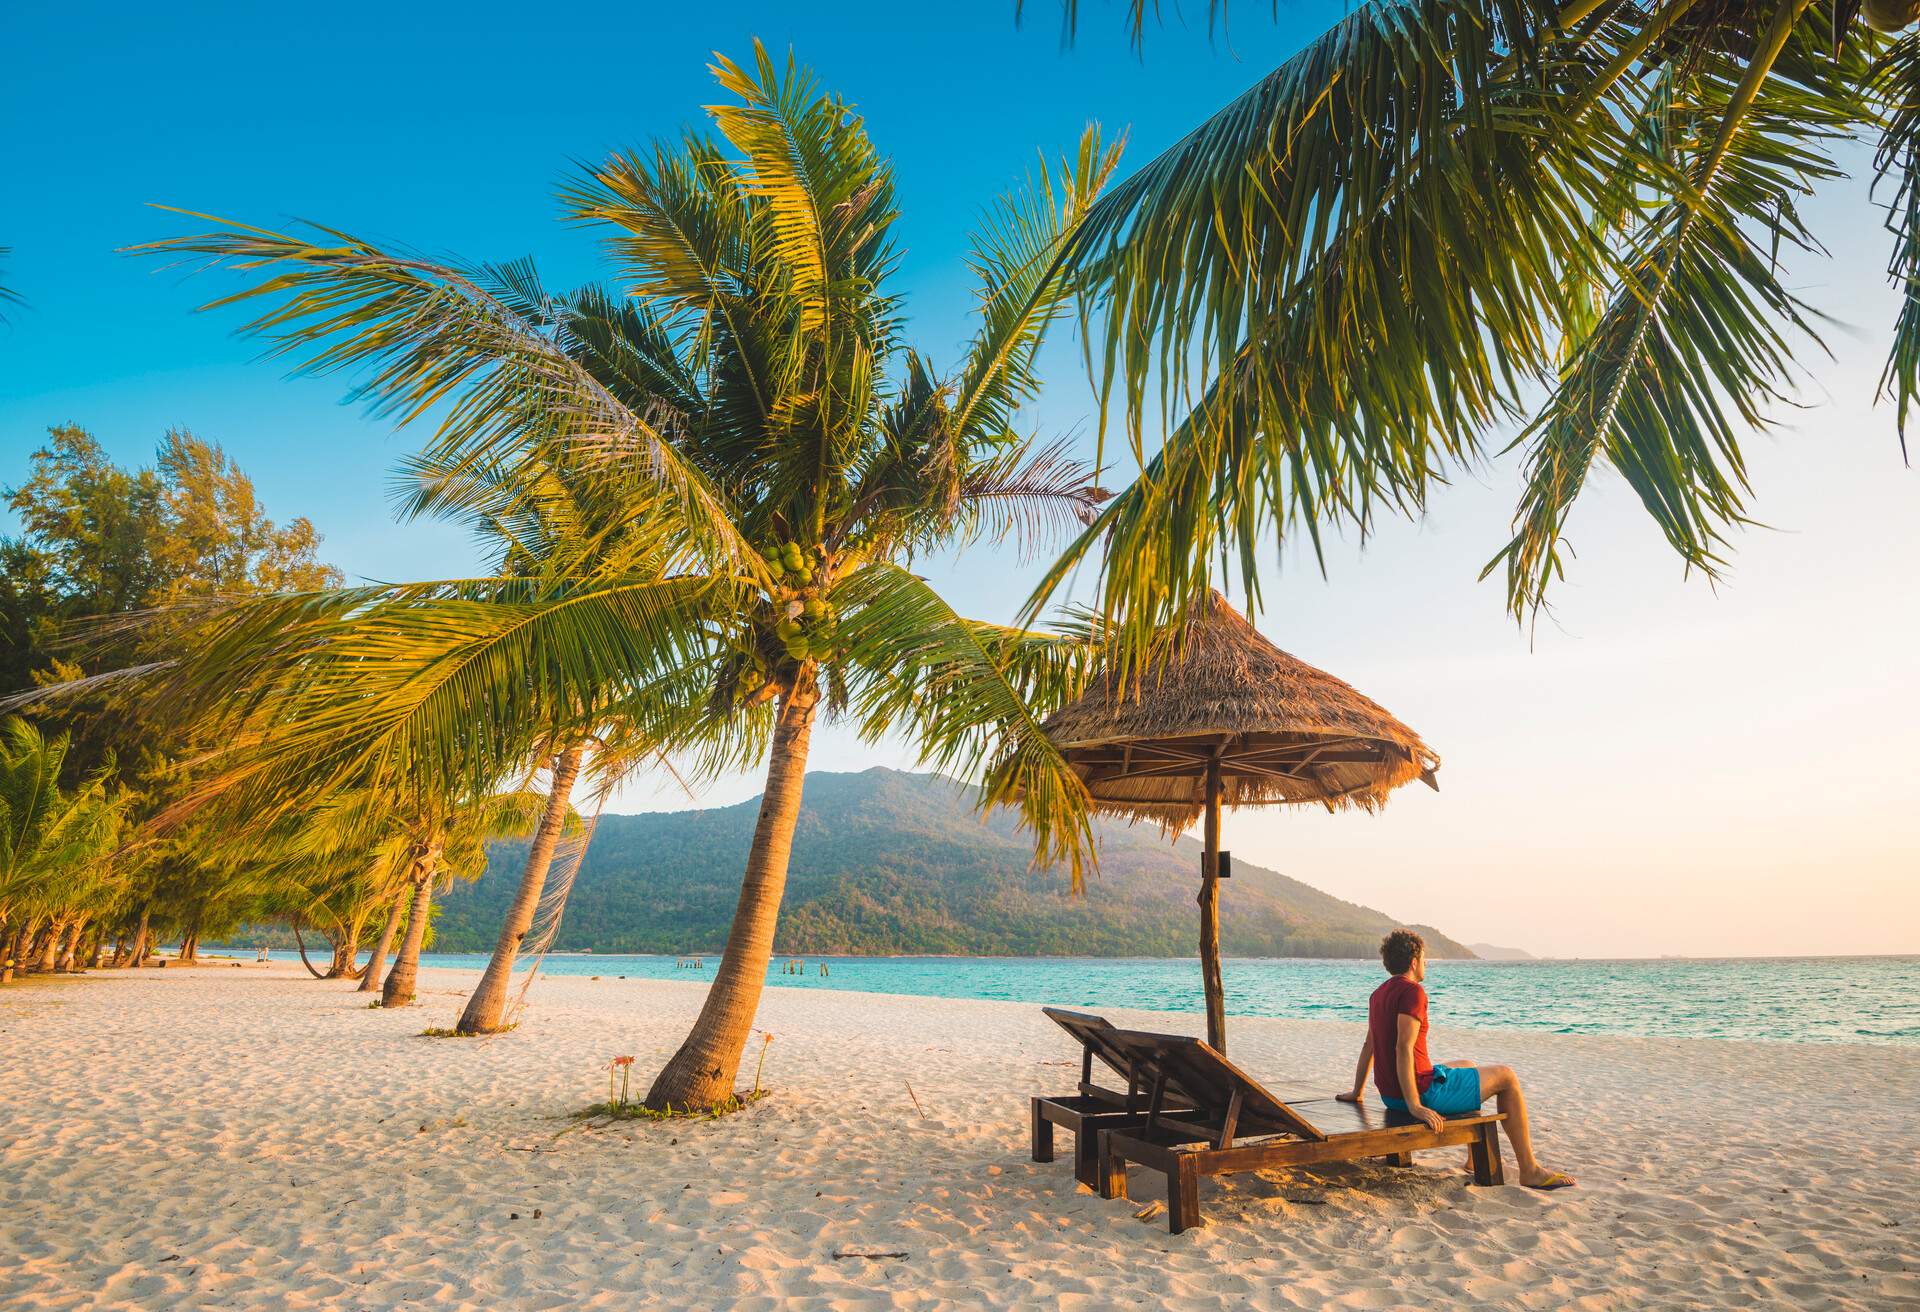 A lone man sits in a wooden sun chair with a straw hut umbrella on the white sand shore by the blue sea at sunrise.